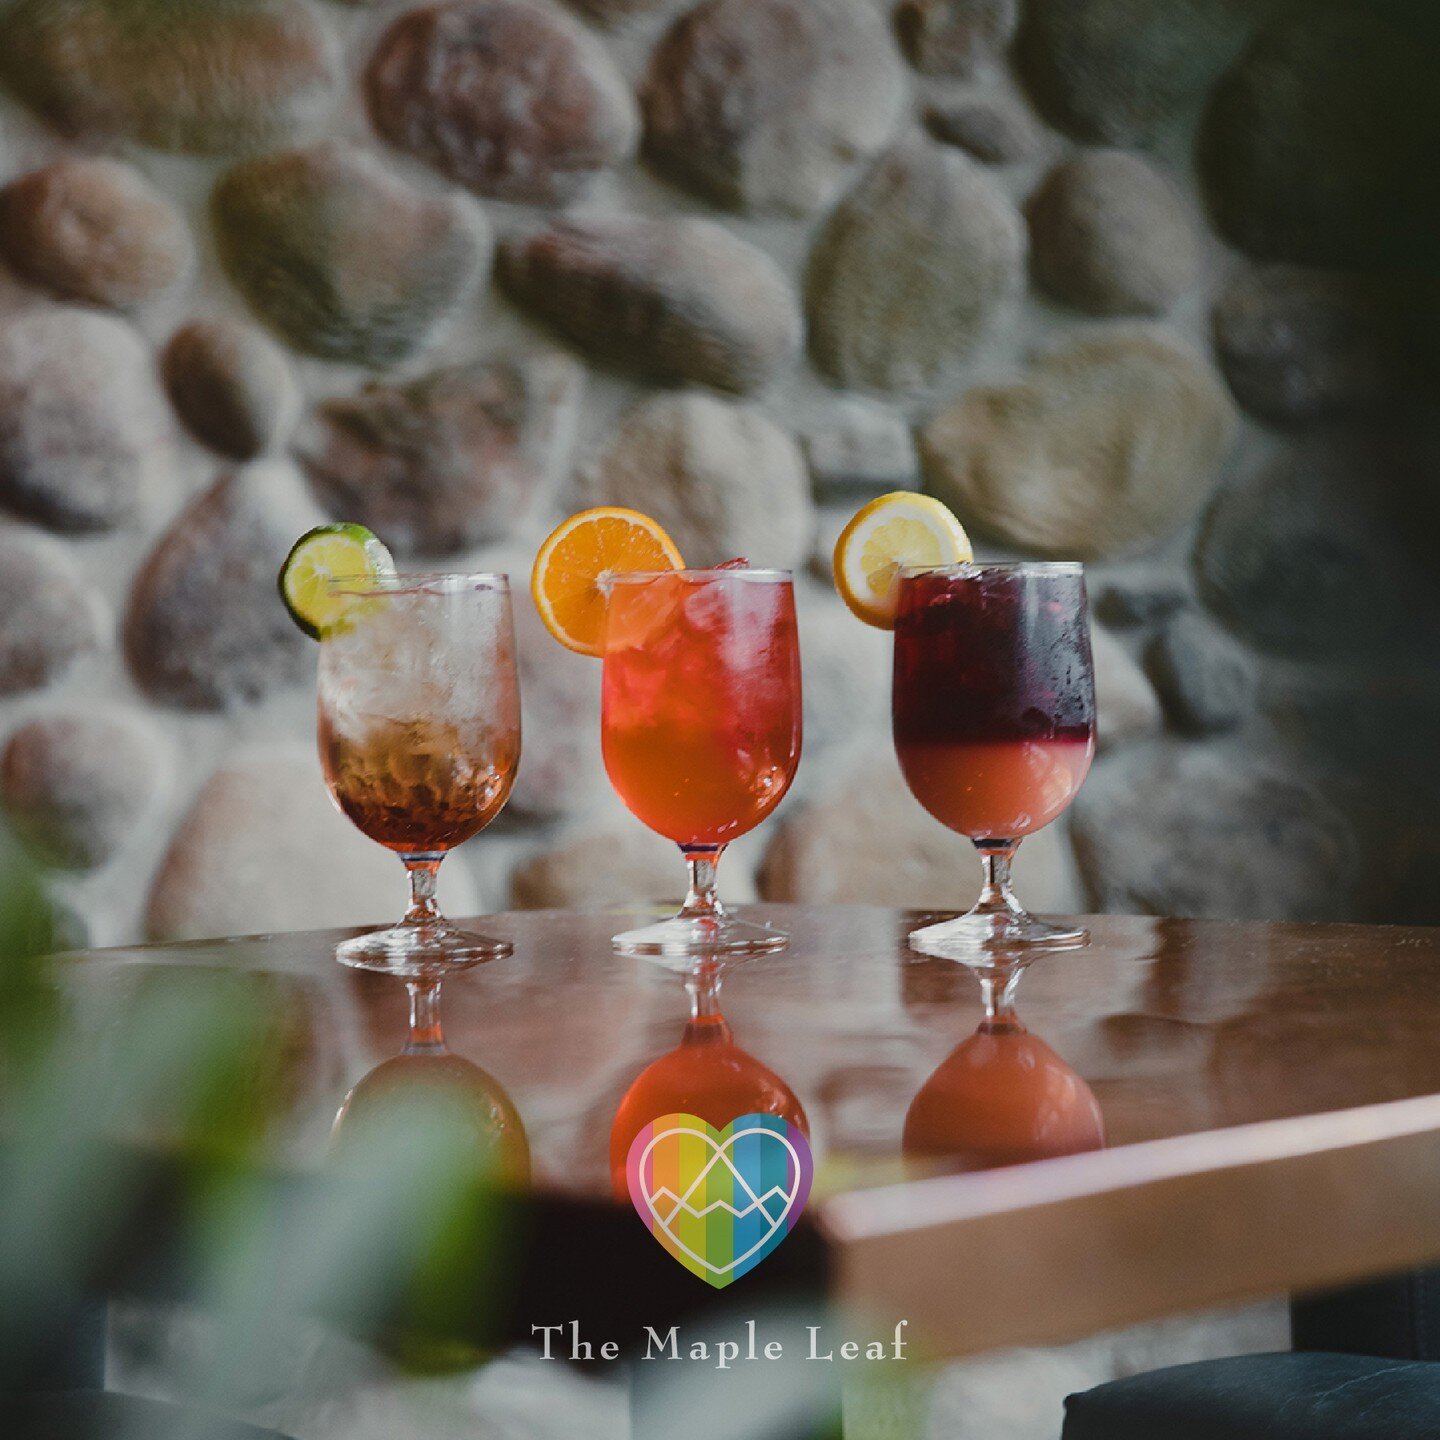 Banff Pride starts today! Fruity cocktails and supporting a great cause - can&rsquo;t beat that!
From now until October 10th, $3 from each Taste The Rainbow cocktail goes to Camp Fyrefly.
DRINK UP, BE PROUD, SUPPORT CAMP FYREFLY.

www.ualberta.ca/cam